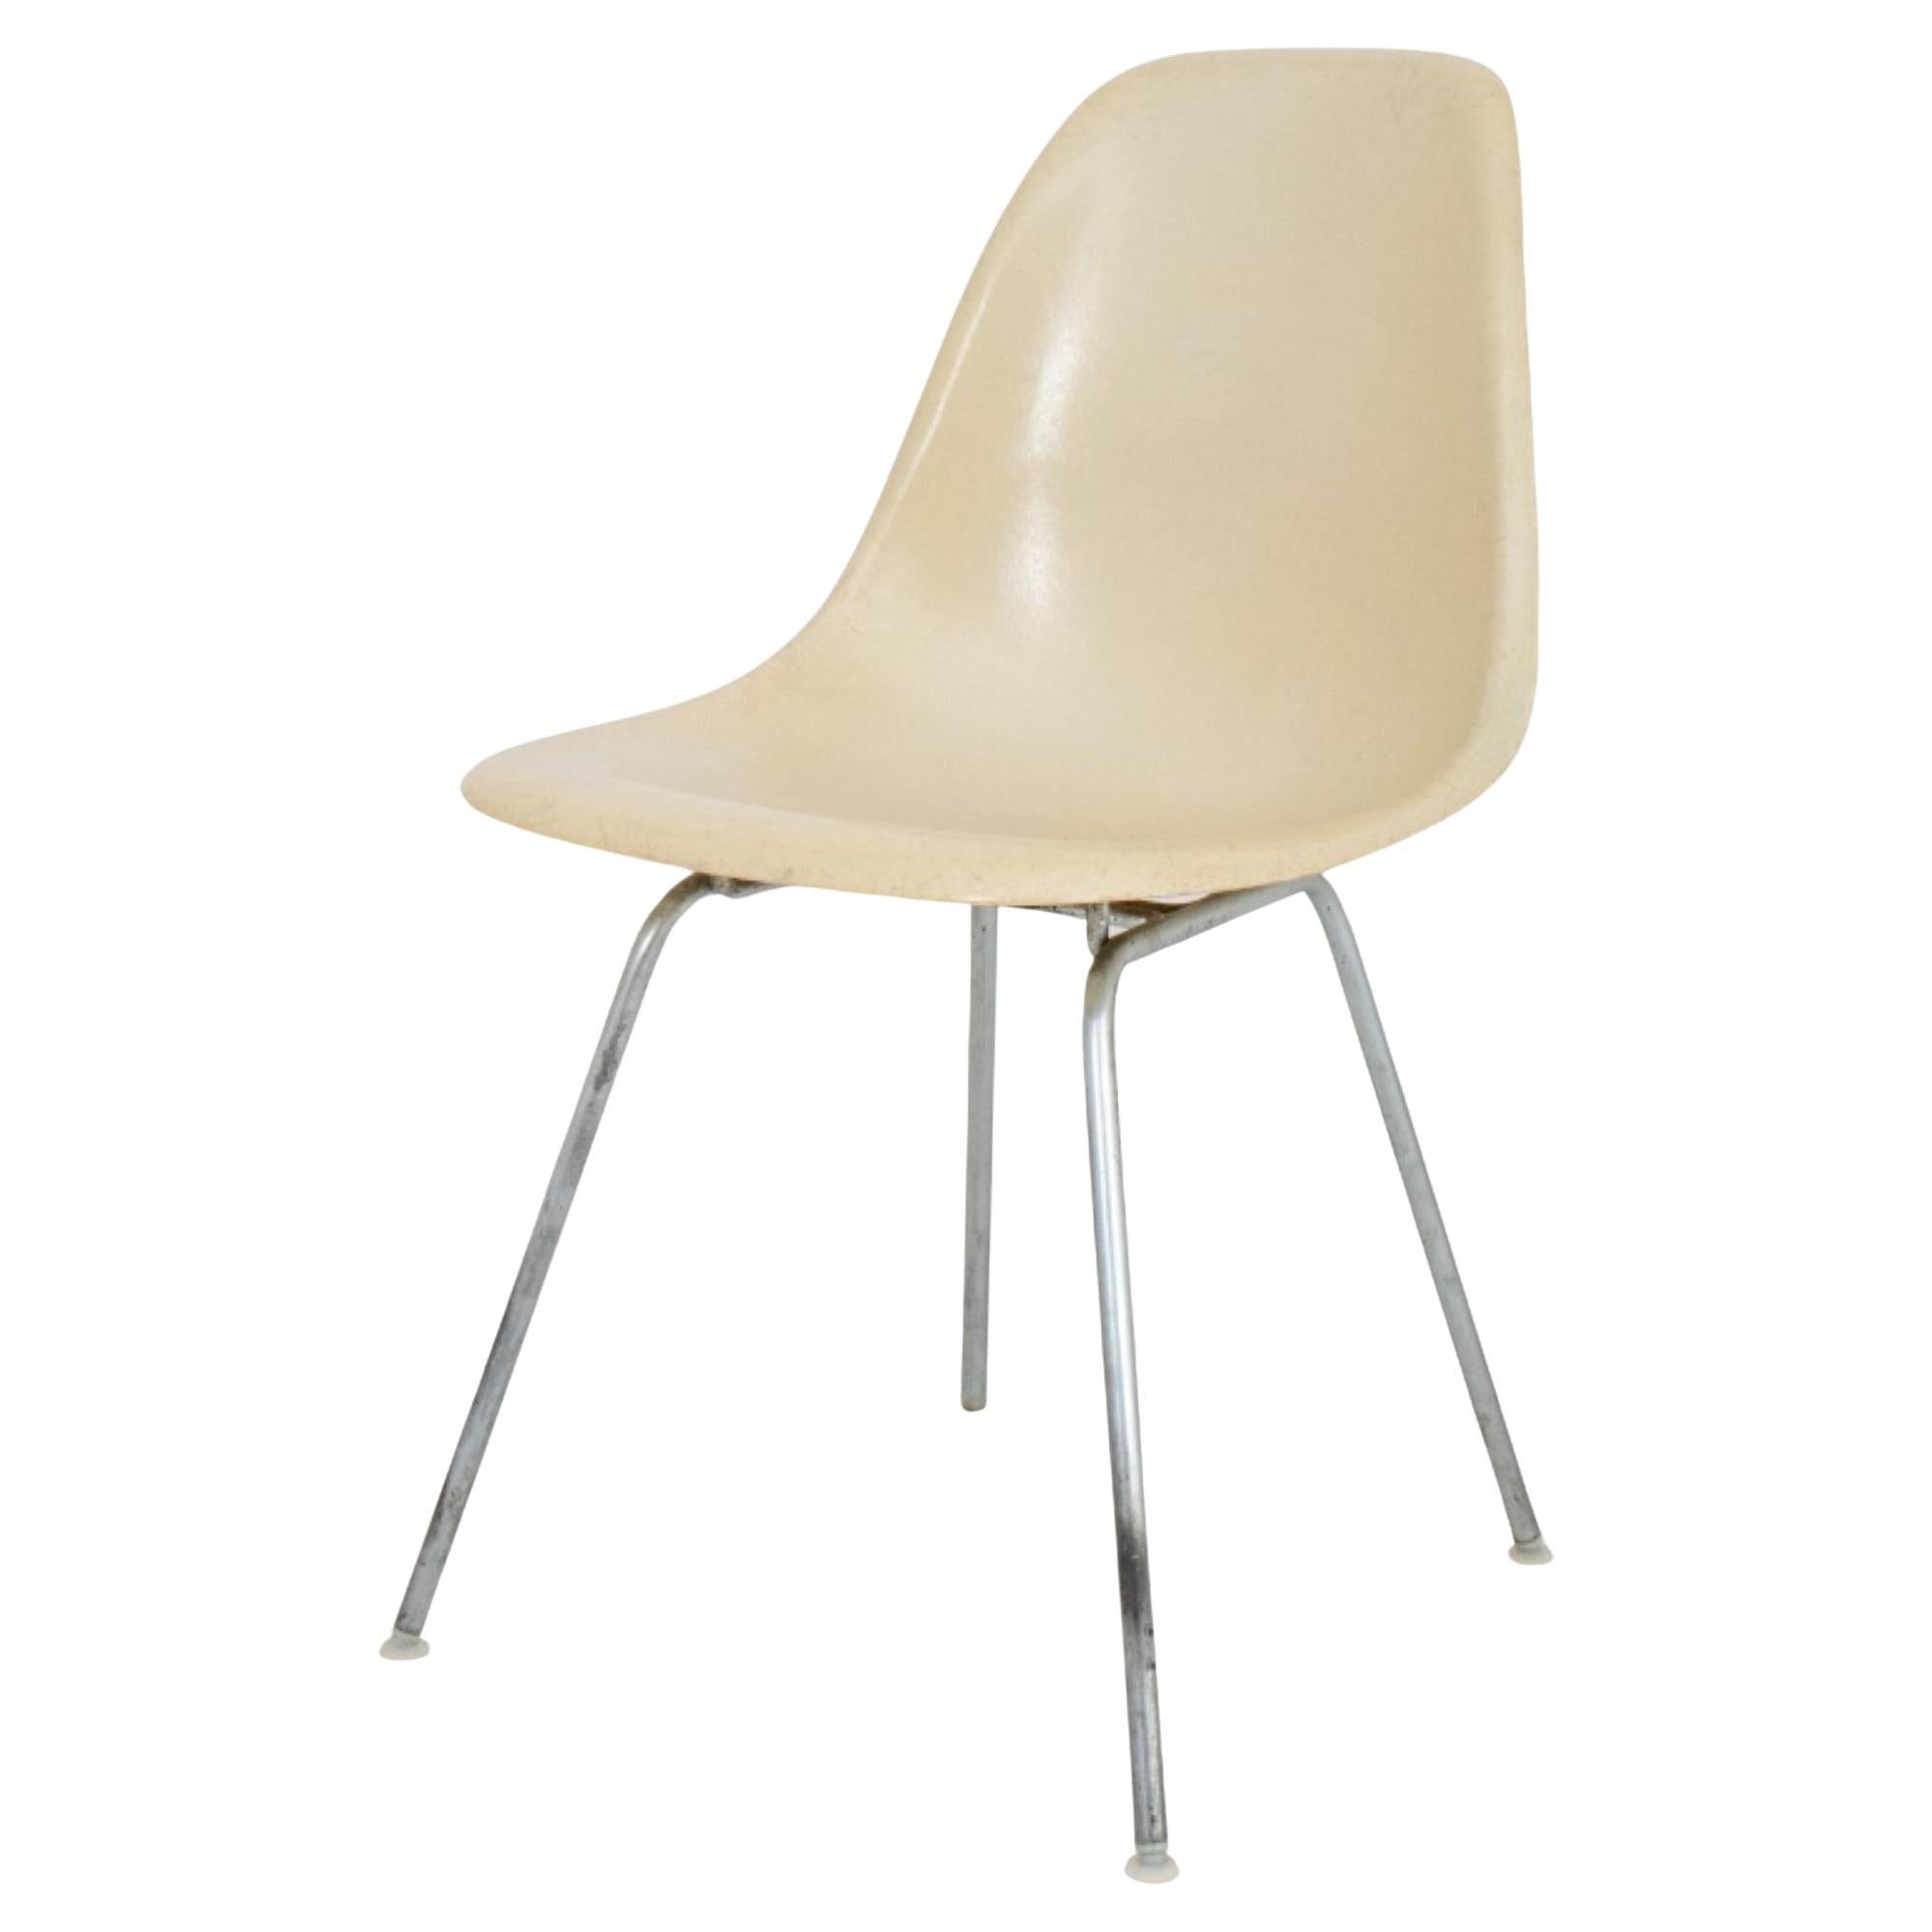 What was the original Eames chair made of?